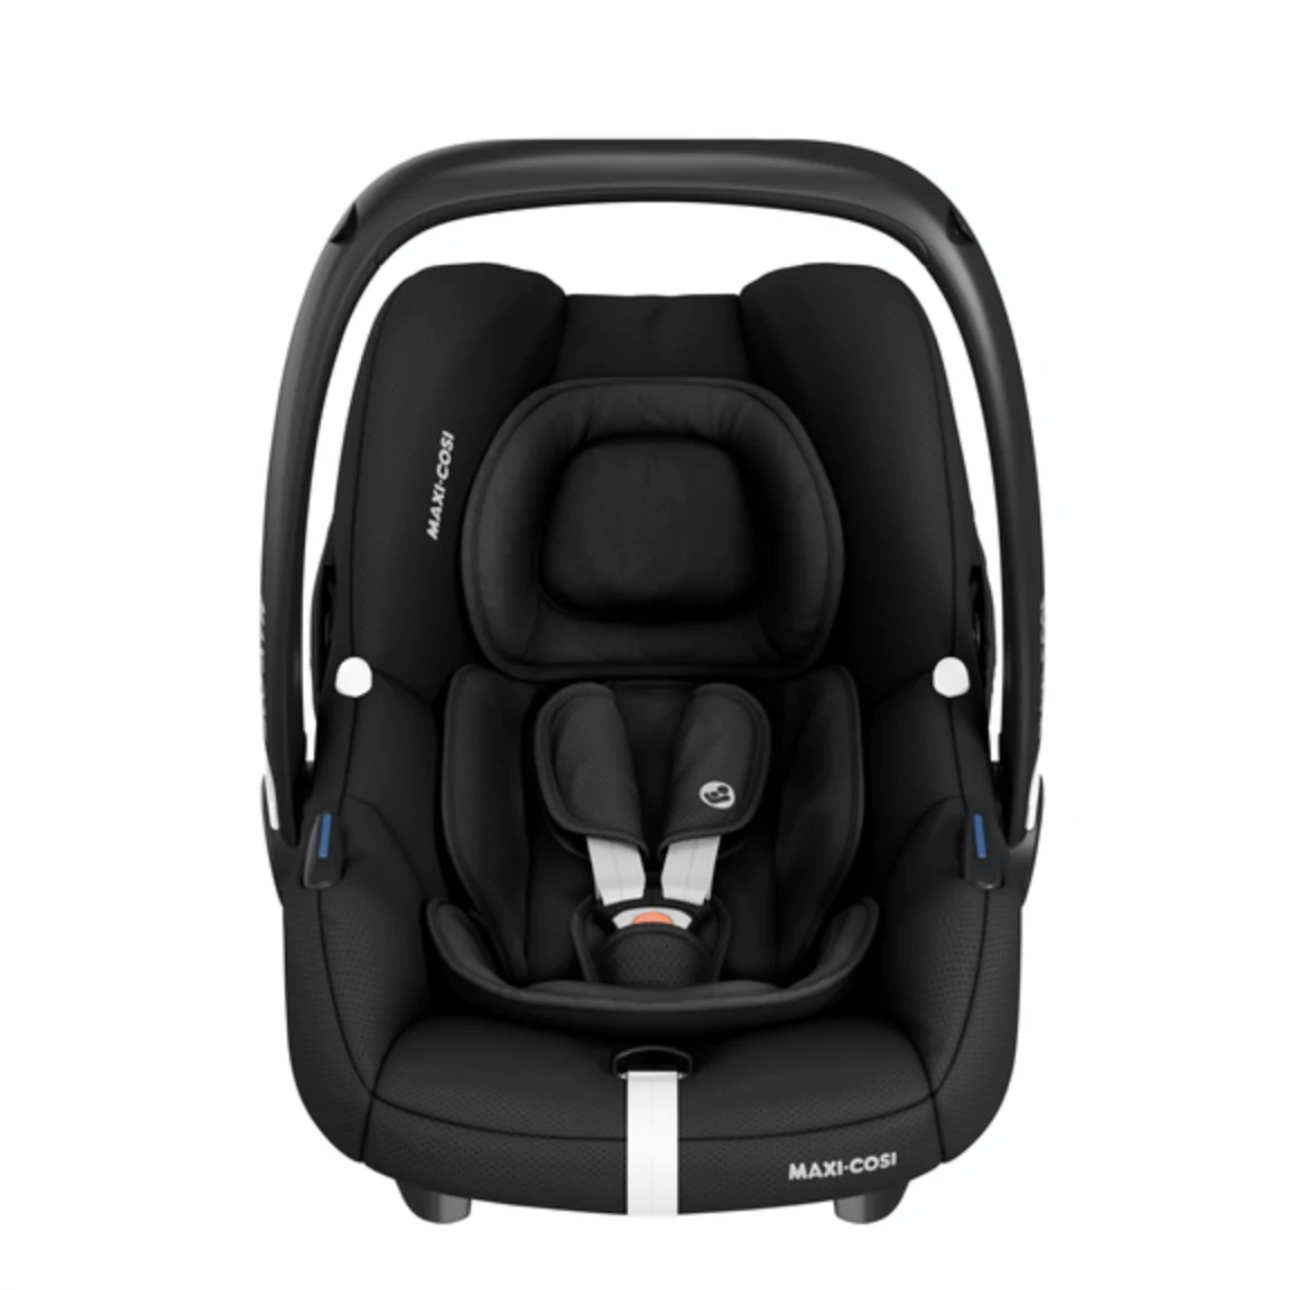 Silver Cross Tide Pushchair, Maxi-Cosi Cabriofix i-Size,Isofix & Accessory Bundle | Sage on Black Chassis